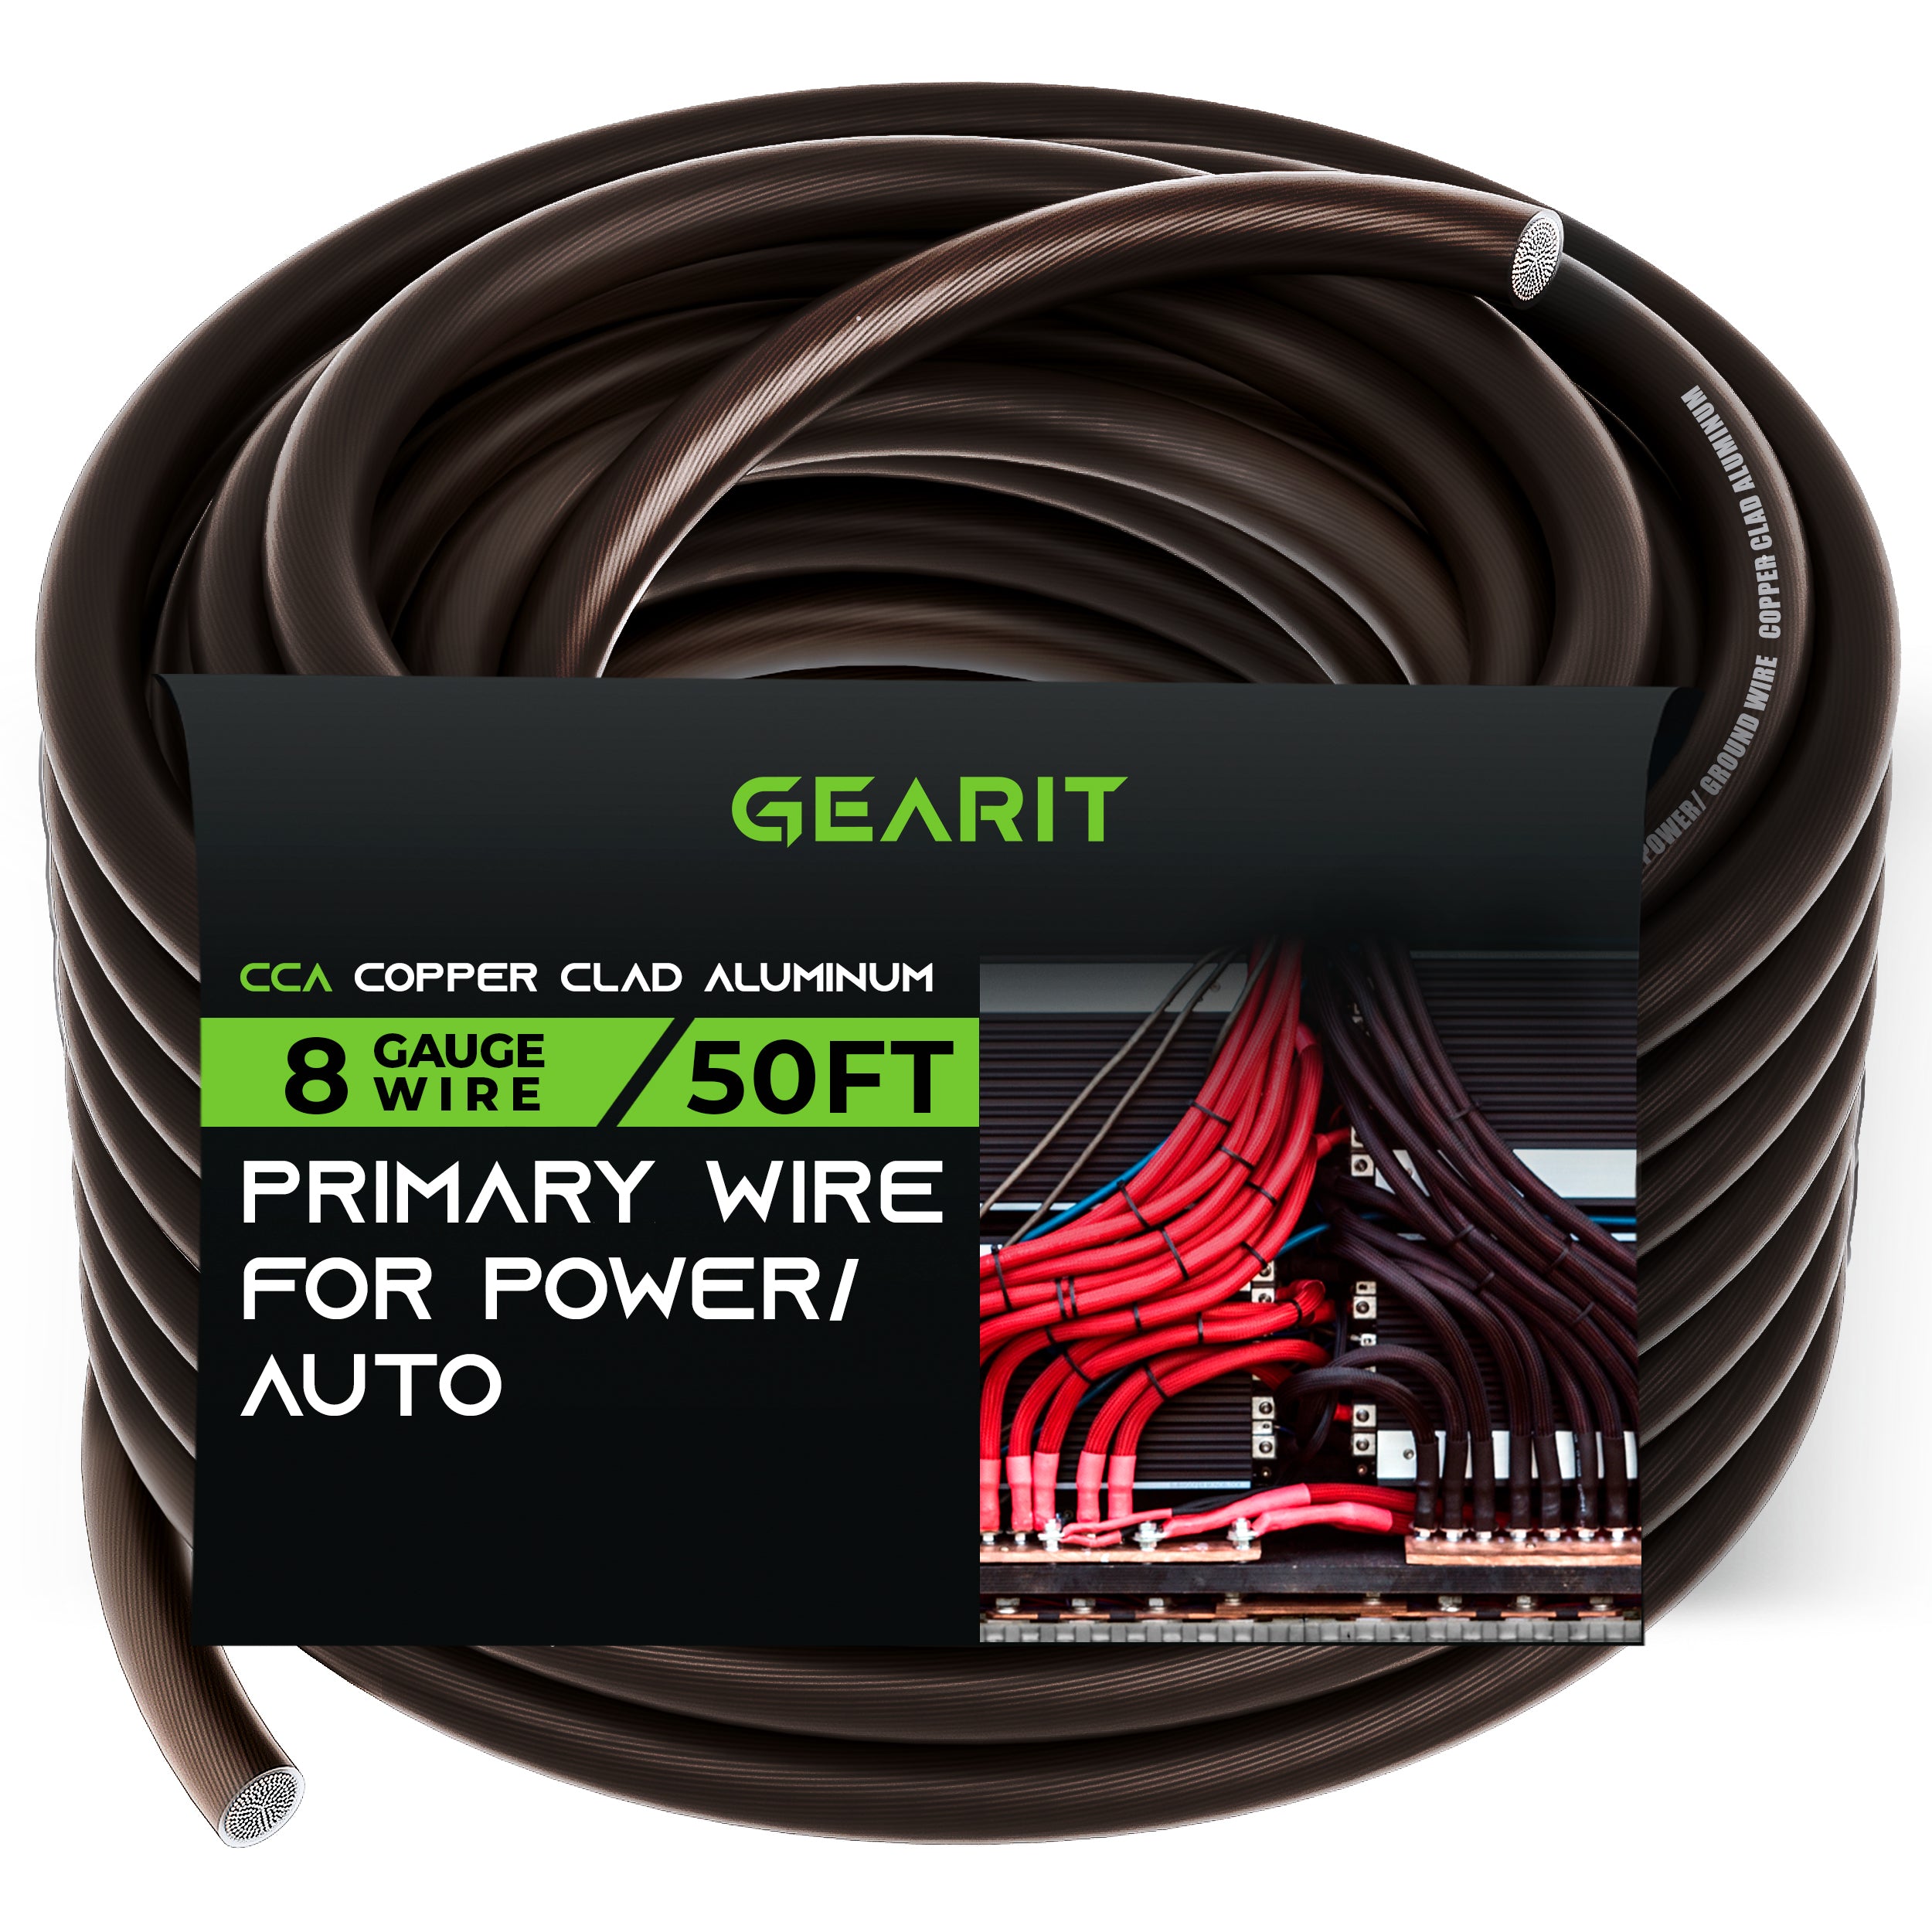 Iron Forge Cable 8 Gauge Primary Wire 2 Pack - 25ft Copper Clad Alumin -  iron forge tools